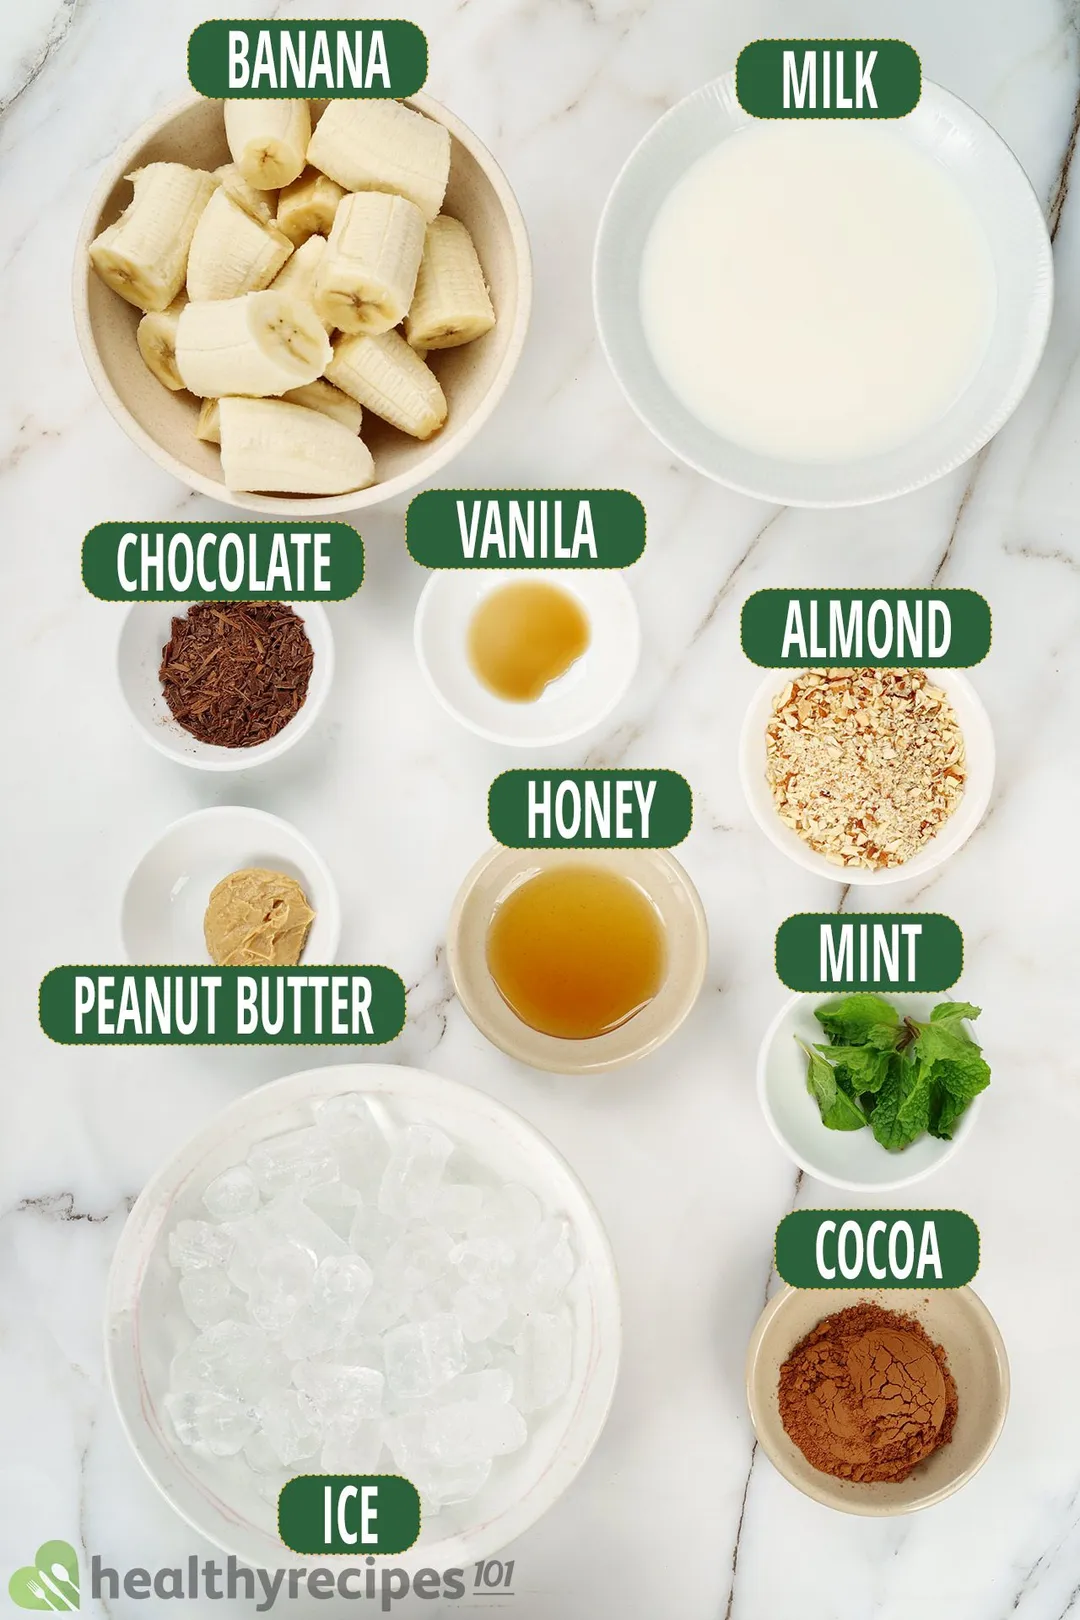 Ingredients for chocolate peanut butter banana smoothie, including sliced and peeled bananas, minced chocolate, cocoa powder, and other ingredients.